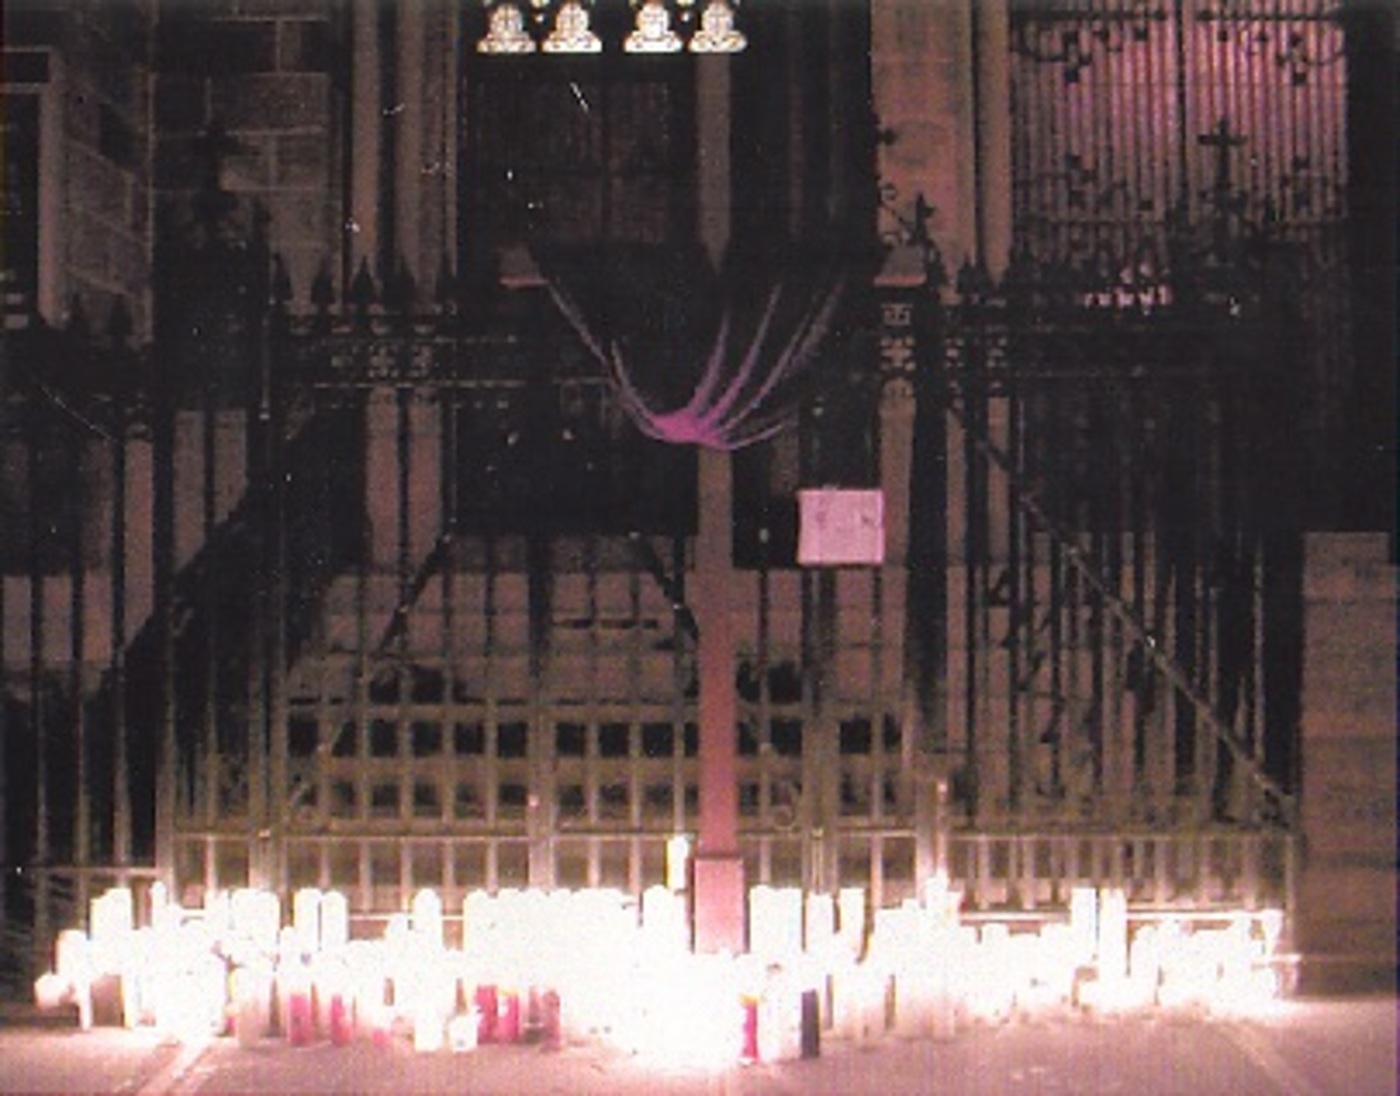 A temporary shrine of lighted candles in memory of those who died on September 11, 2001. 